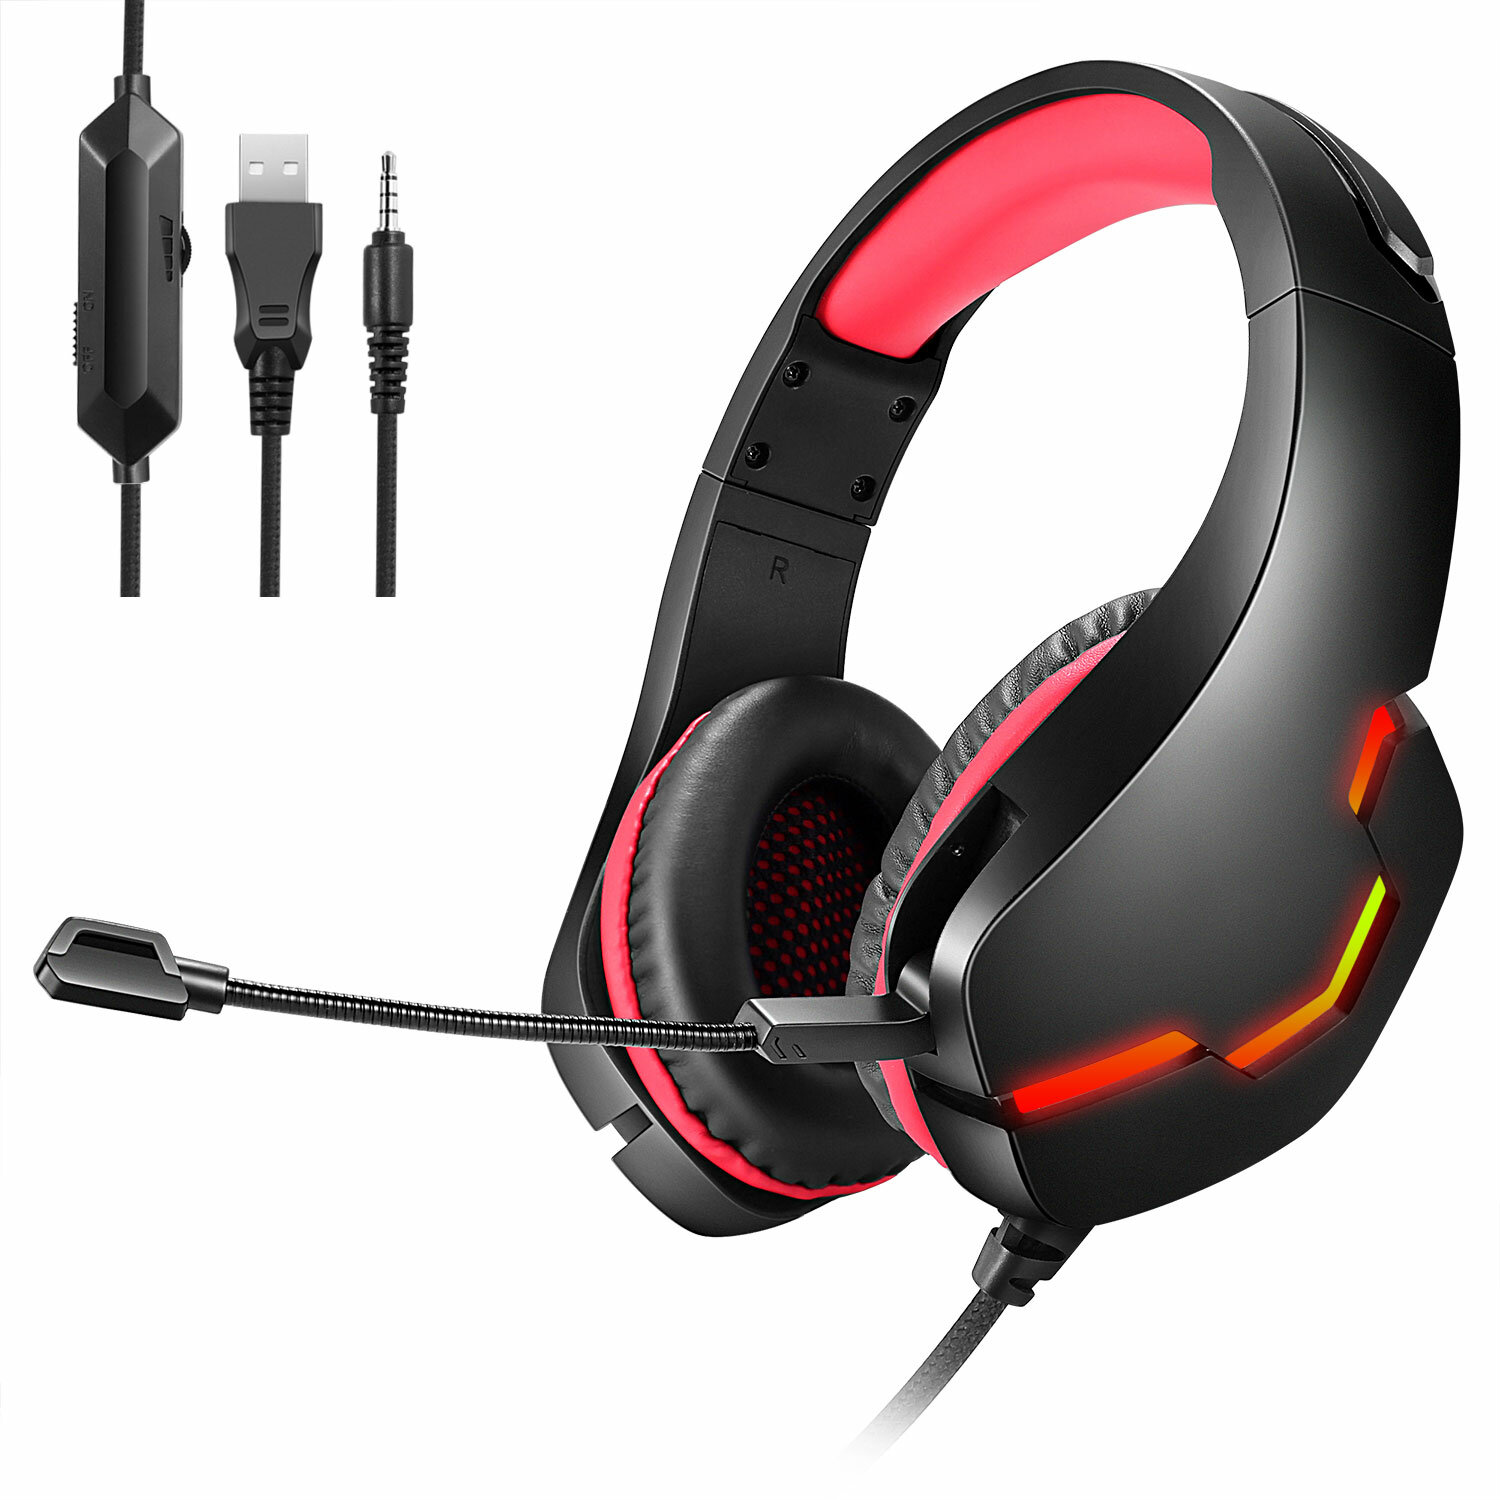 Image of Bakeey J10 Gaming Headset USB 71 35mm Wired Deep Bass Stereo LED Light Headphone with Mic for PS4 Xbox PC Laptop Gamer